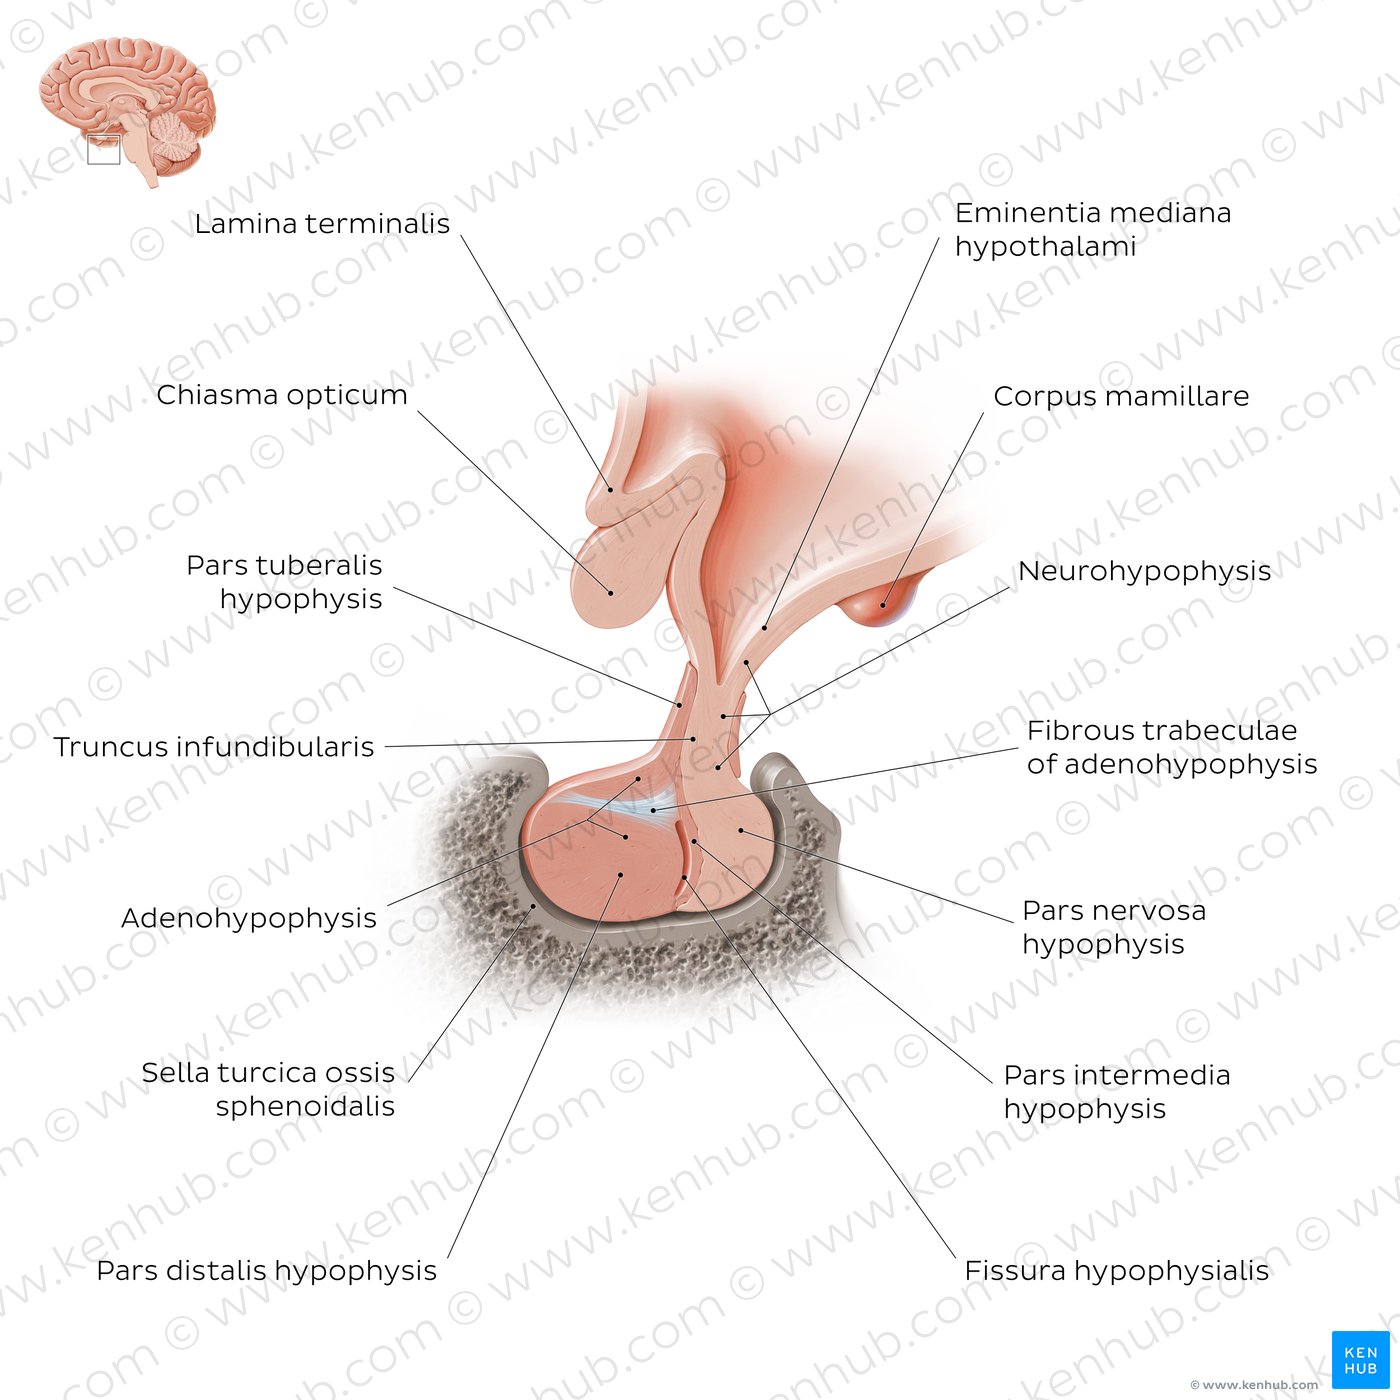 Hypophysis: Overview